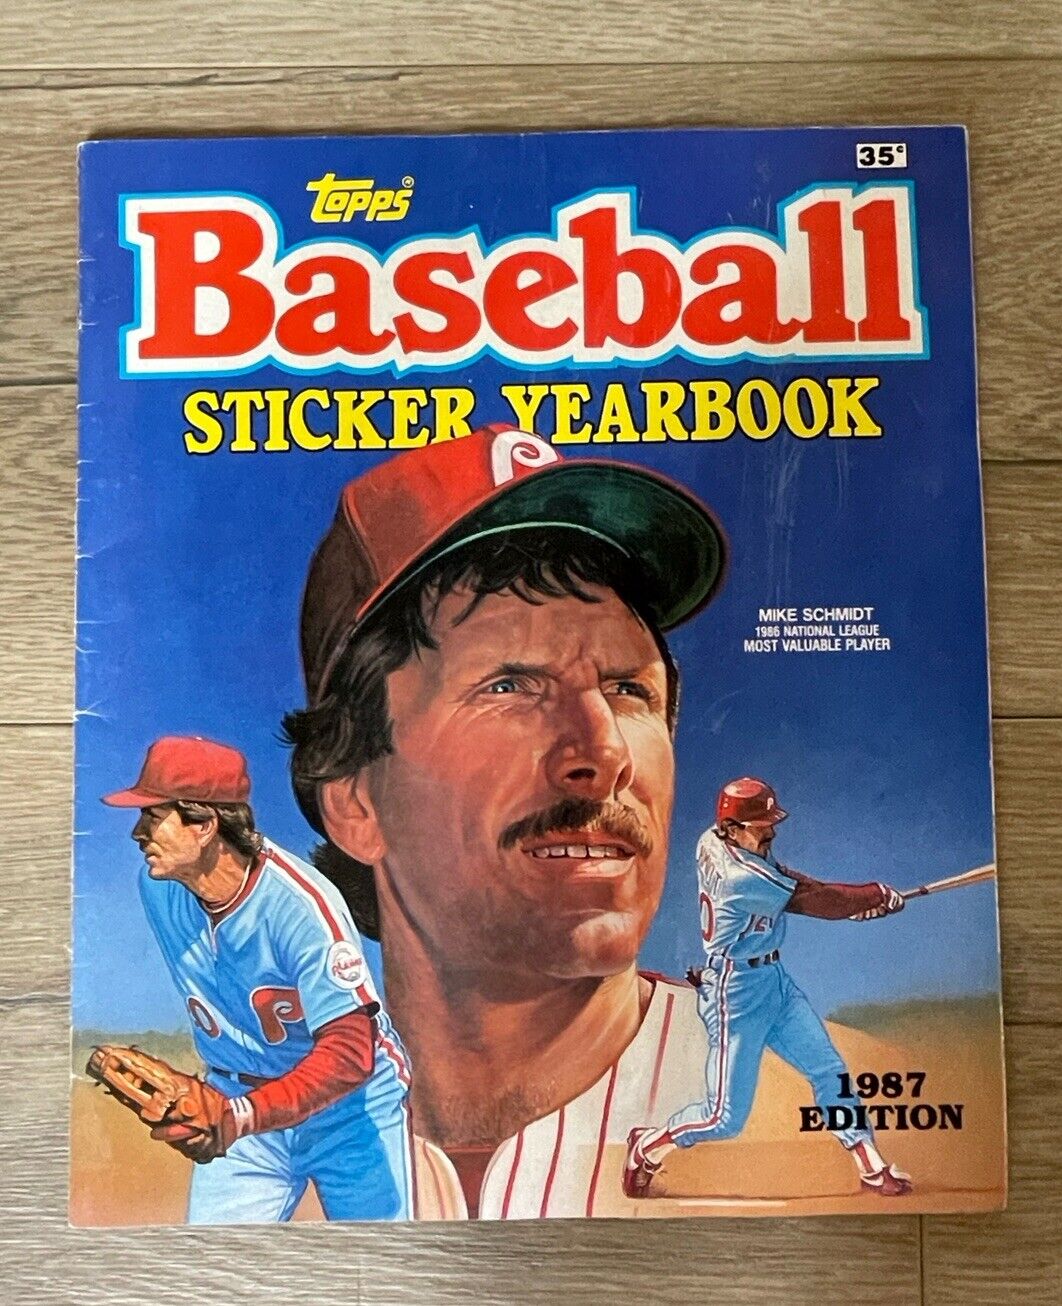 Topps Baseball Sticker Yearbook 1987 Edition Mike Schmidt Cover